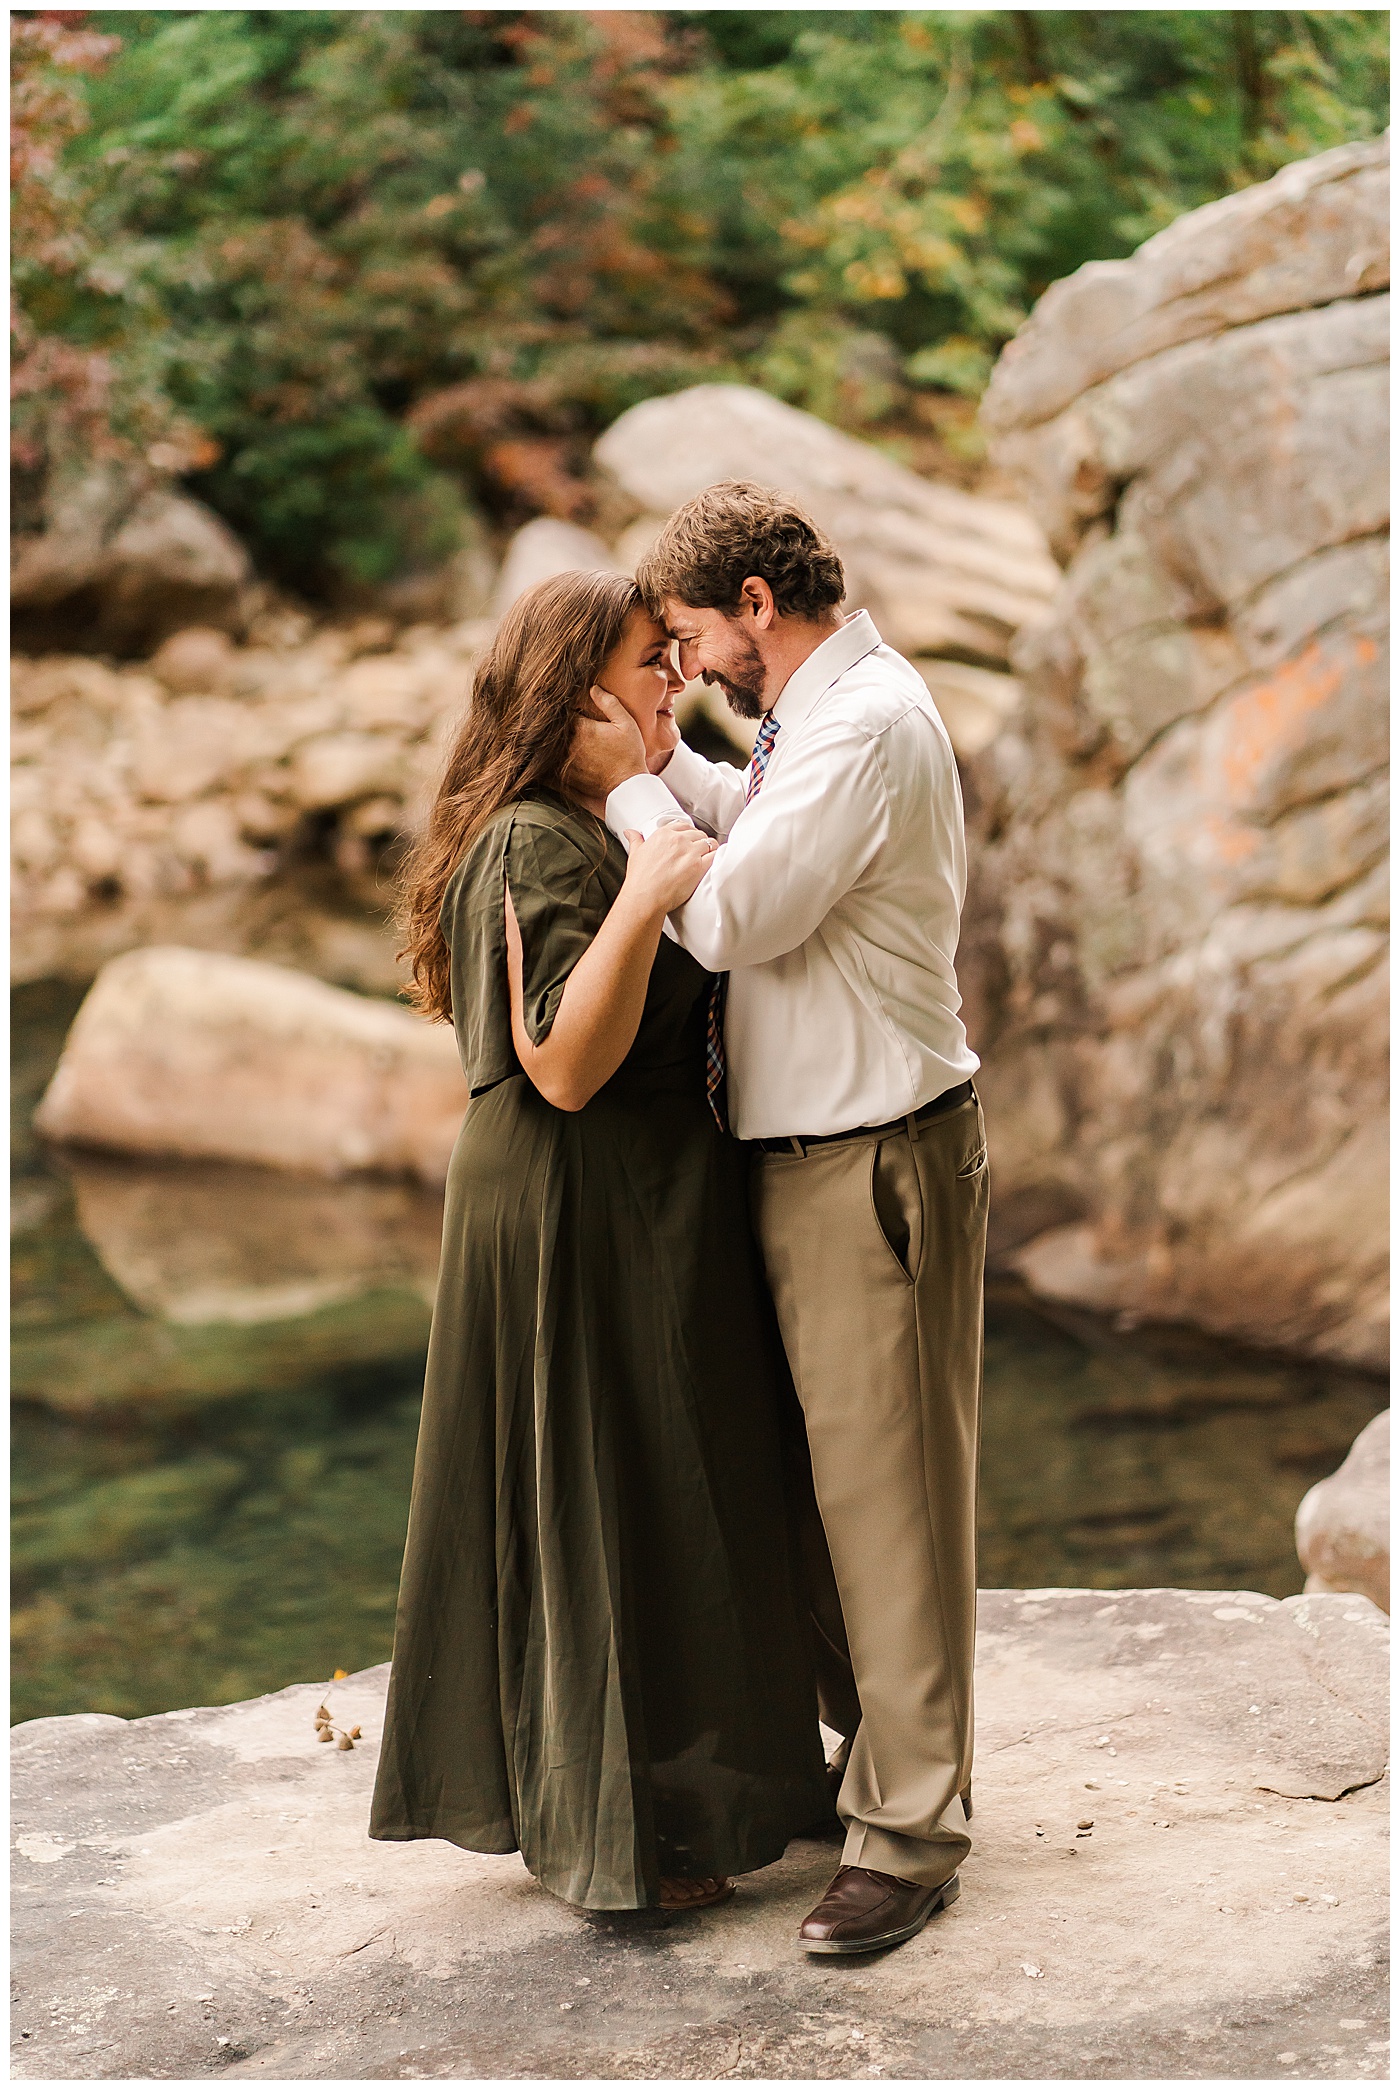 Chattanooga Fall Engagement Photos the Couple